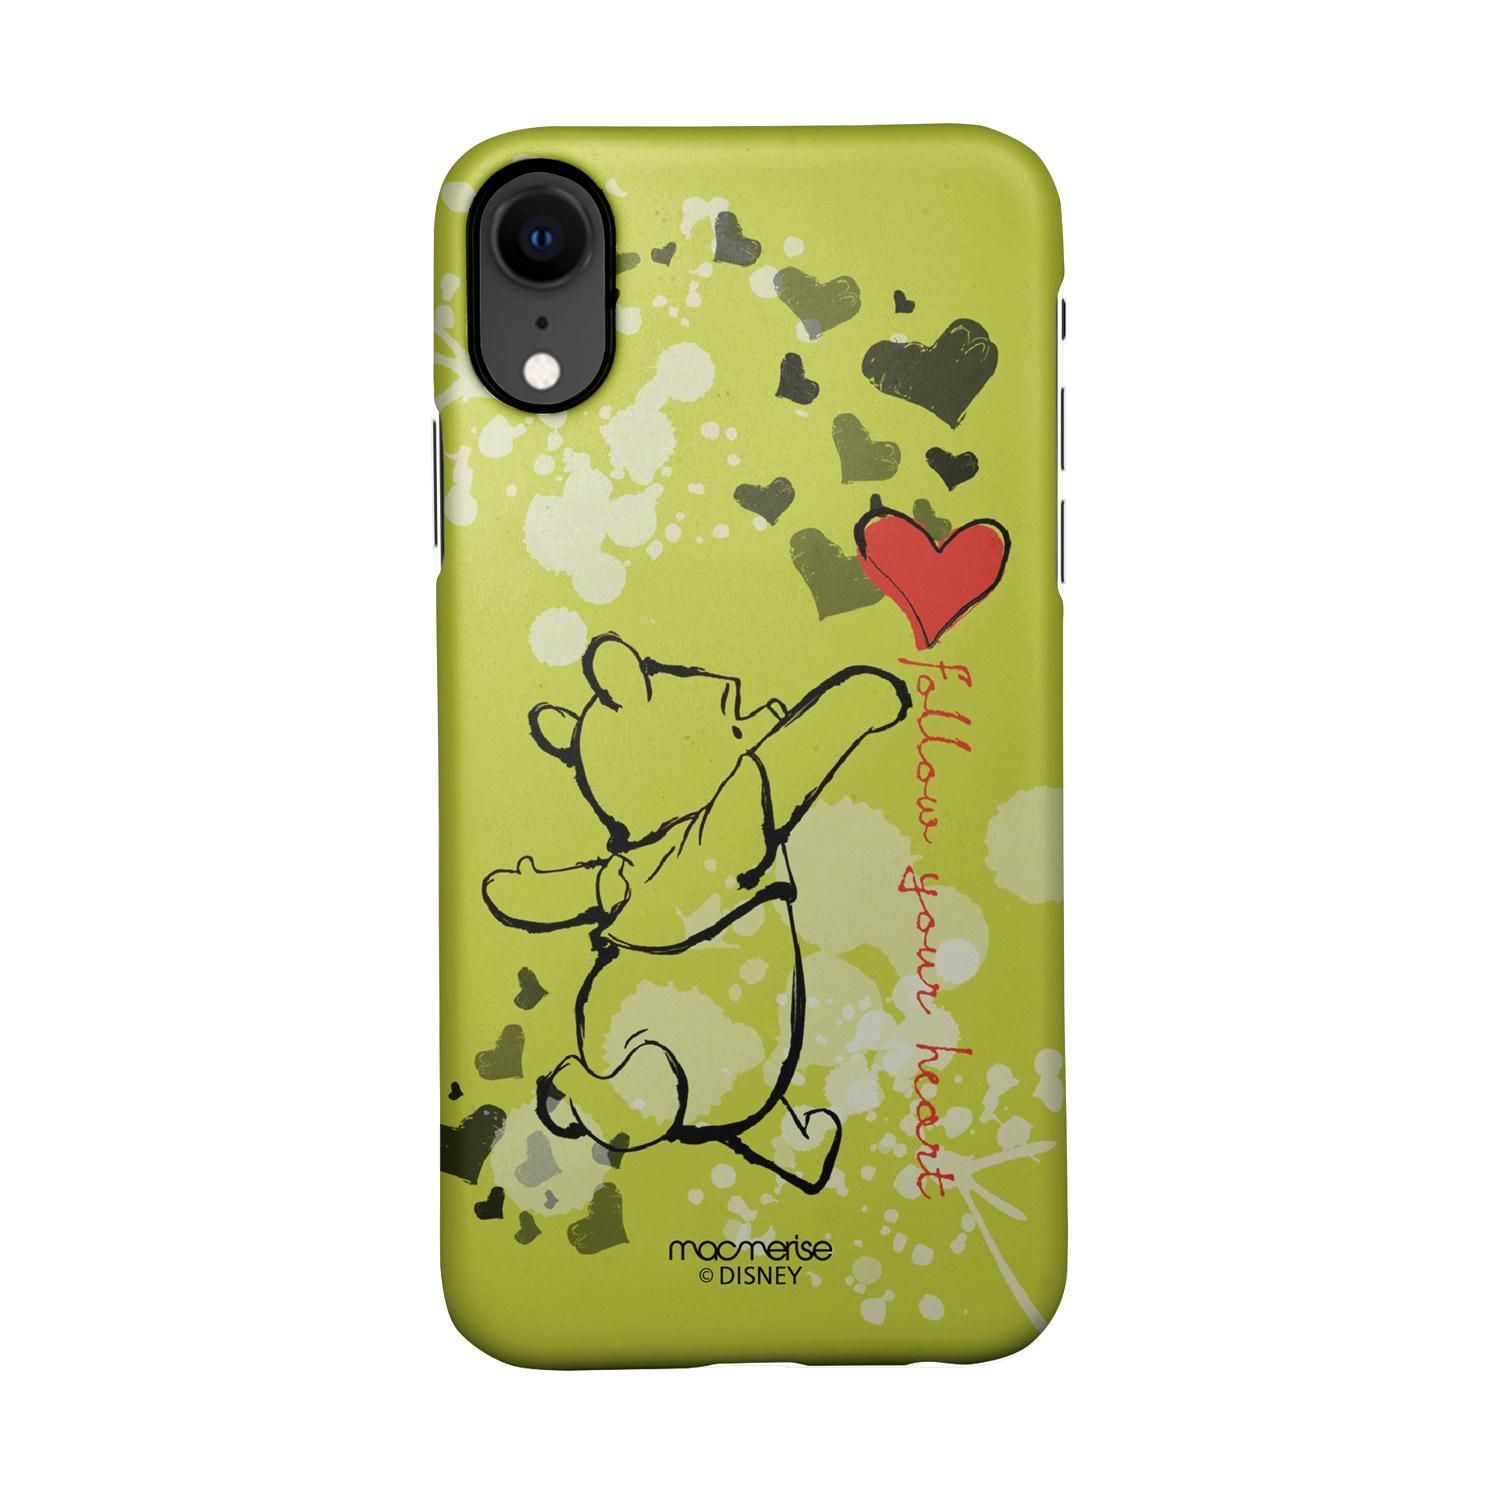 Buy Follow your Heart - Sleek Phone Case for iPhone XR Online